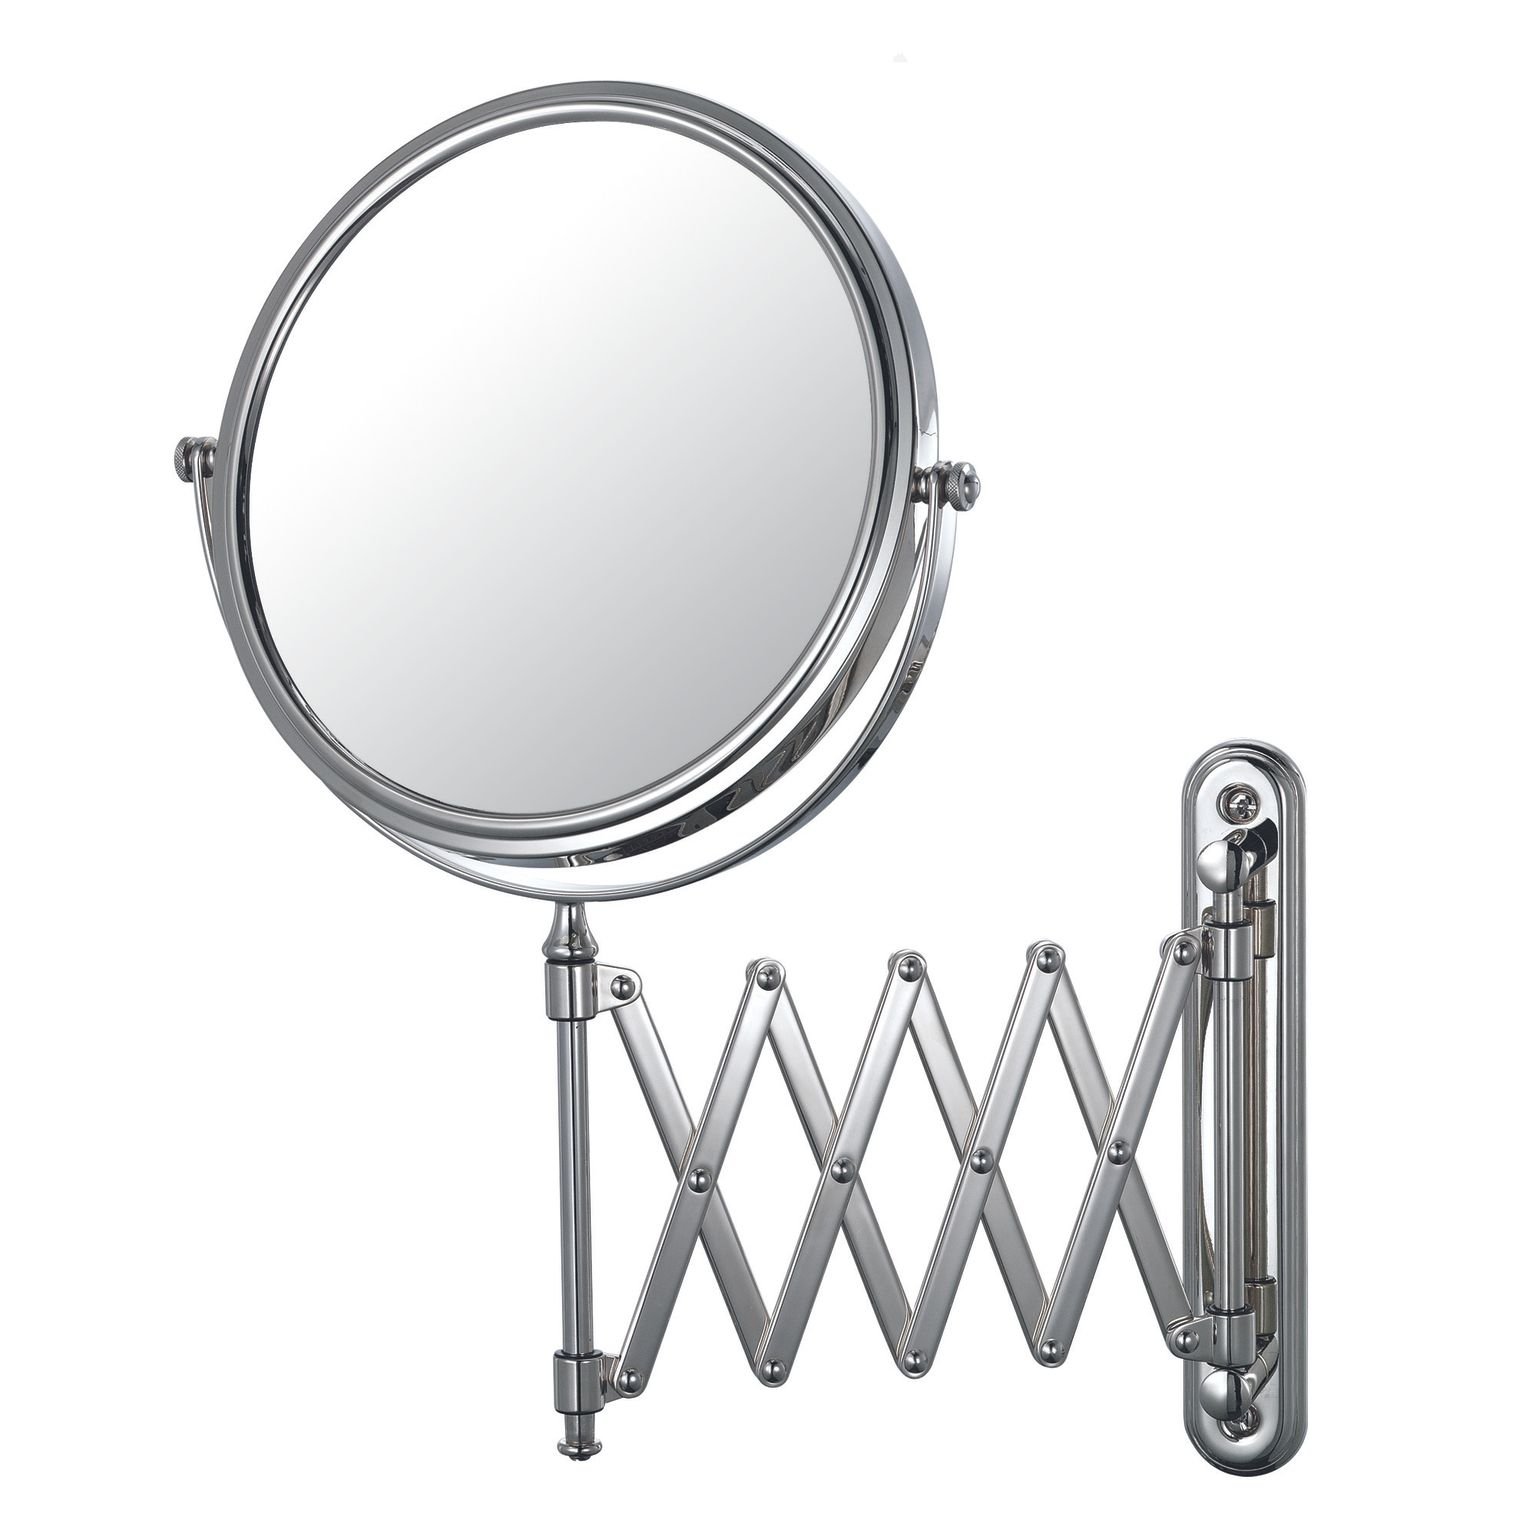 Aptations 23345 Extension Arm Wall Mirror In Chrome 23345 - Chrome